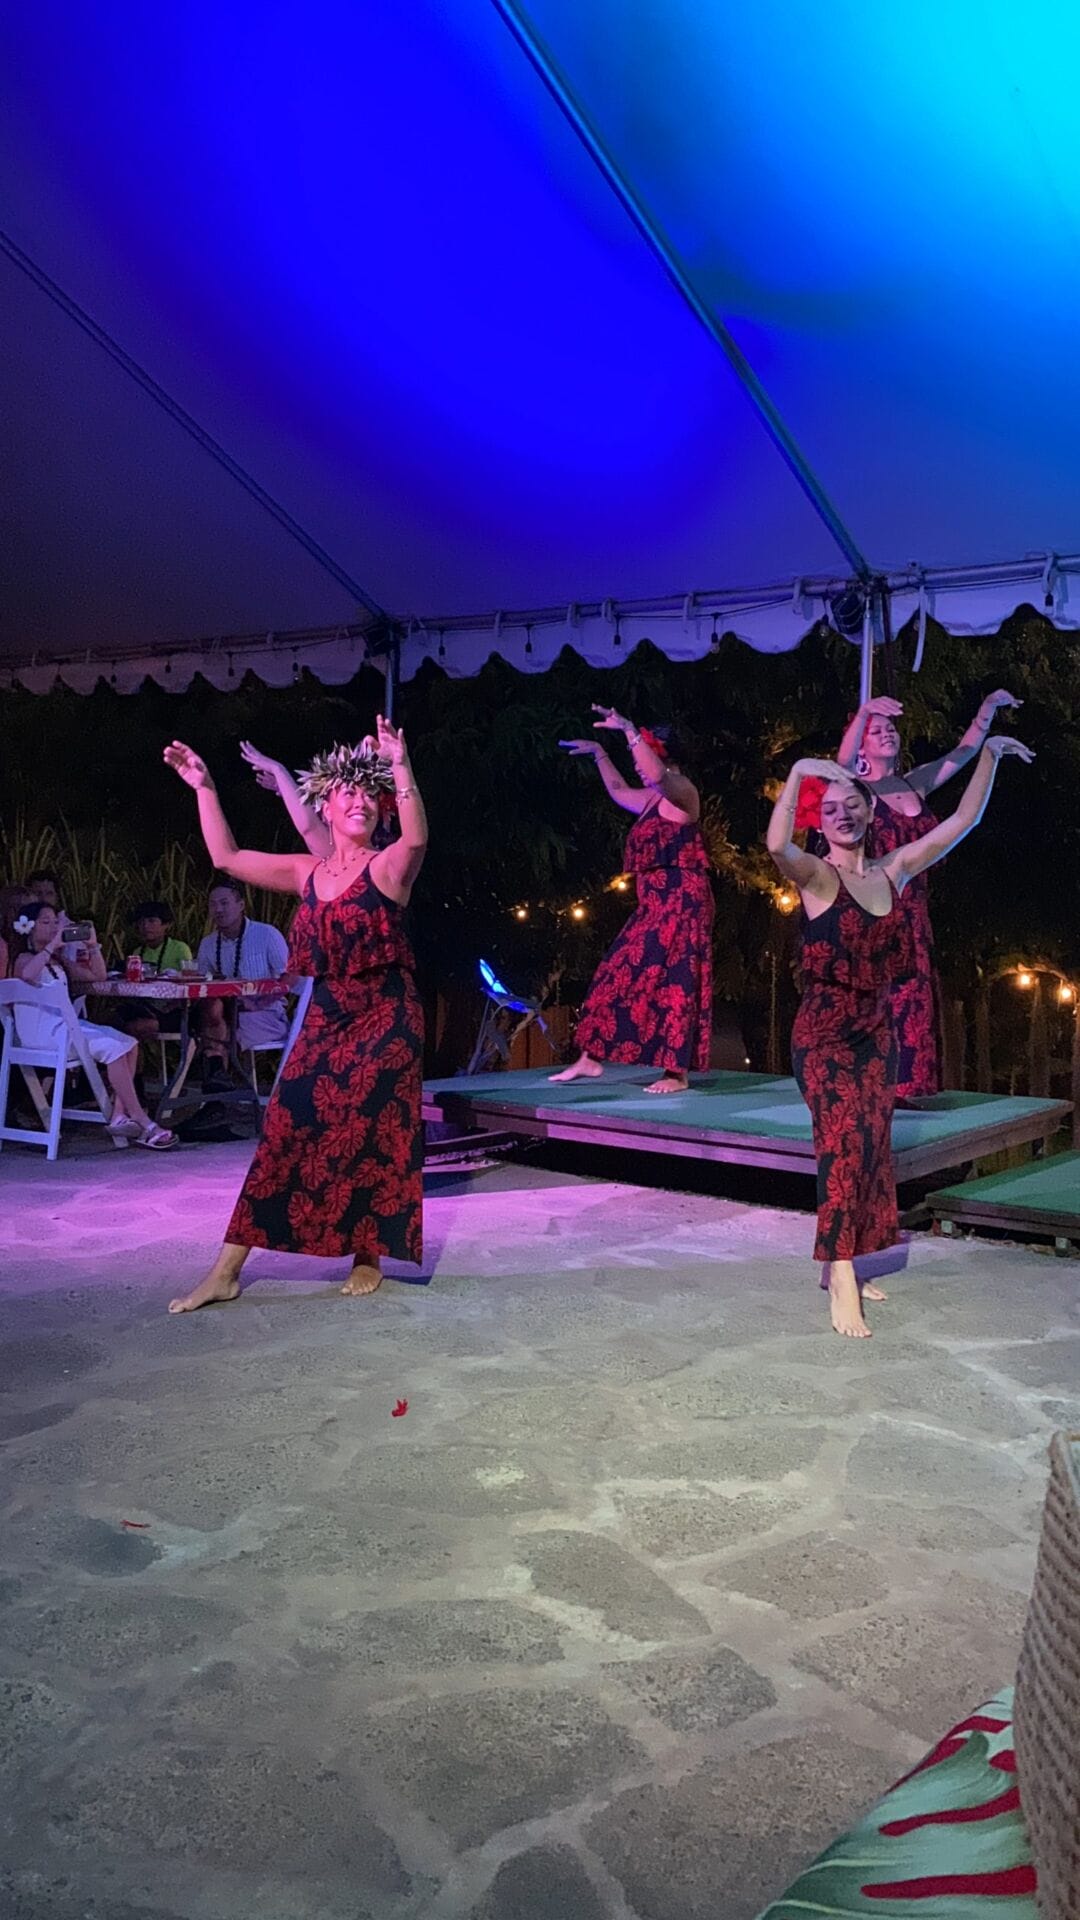 hula dancers in hawaiian luau perform in the evening wearing black and red dresses with flowers in their hair